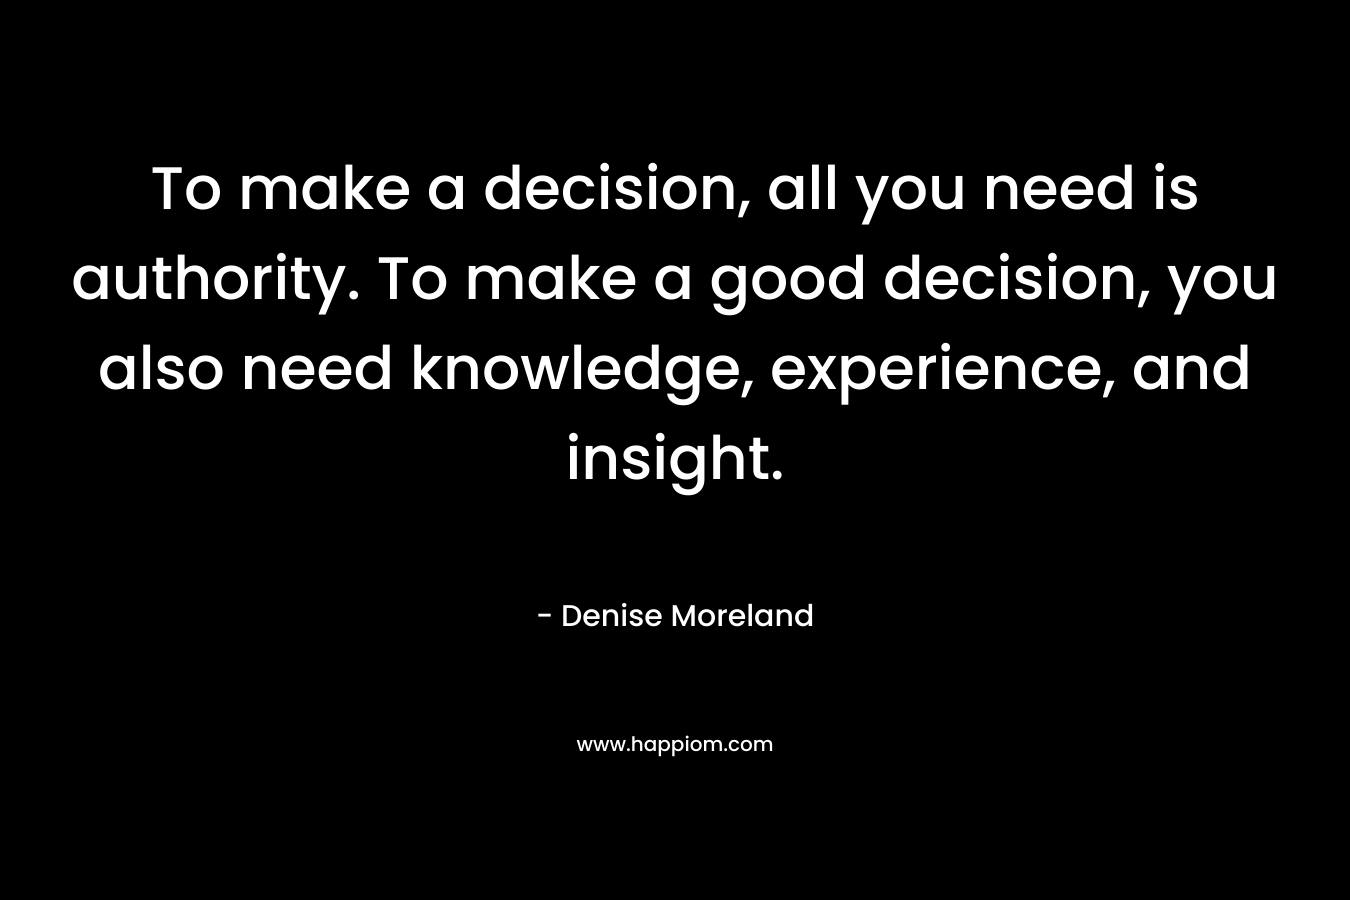 To make a decision, all you need is authority. To make a good decision, you also need knowledge, experience, and insight. – Denise Moreland